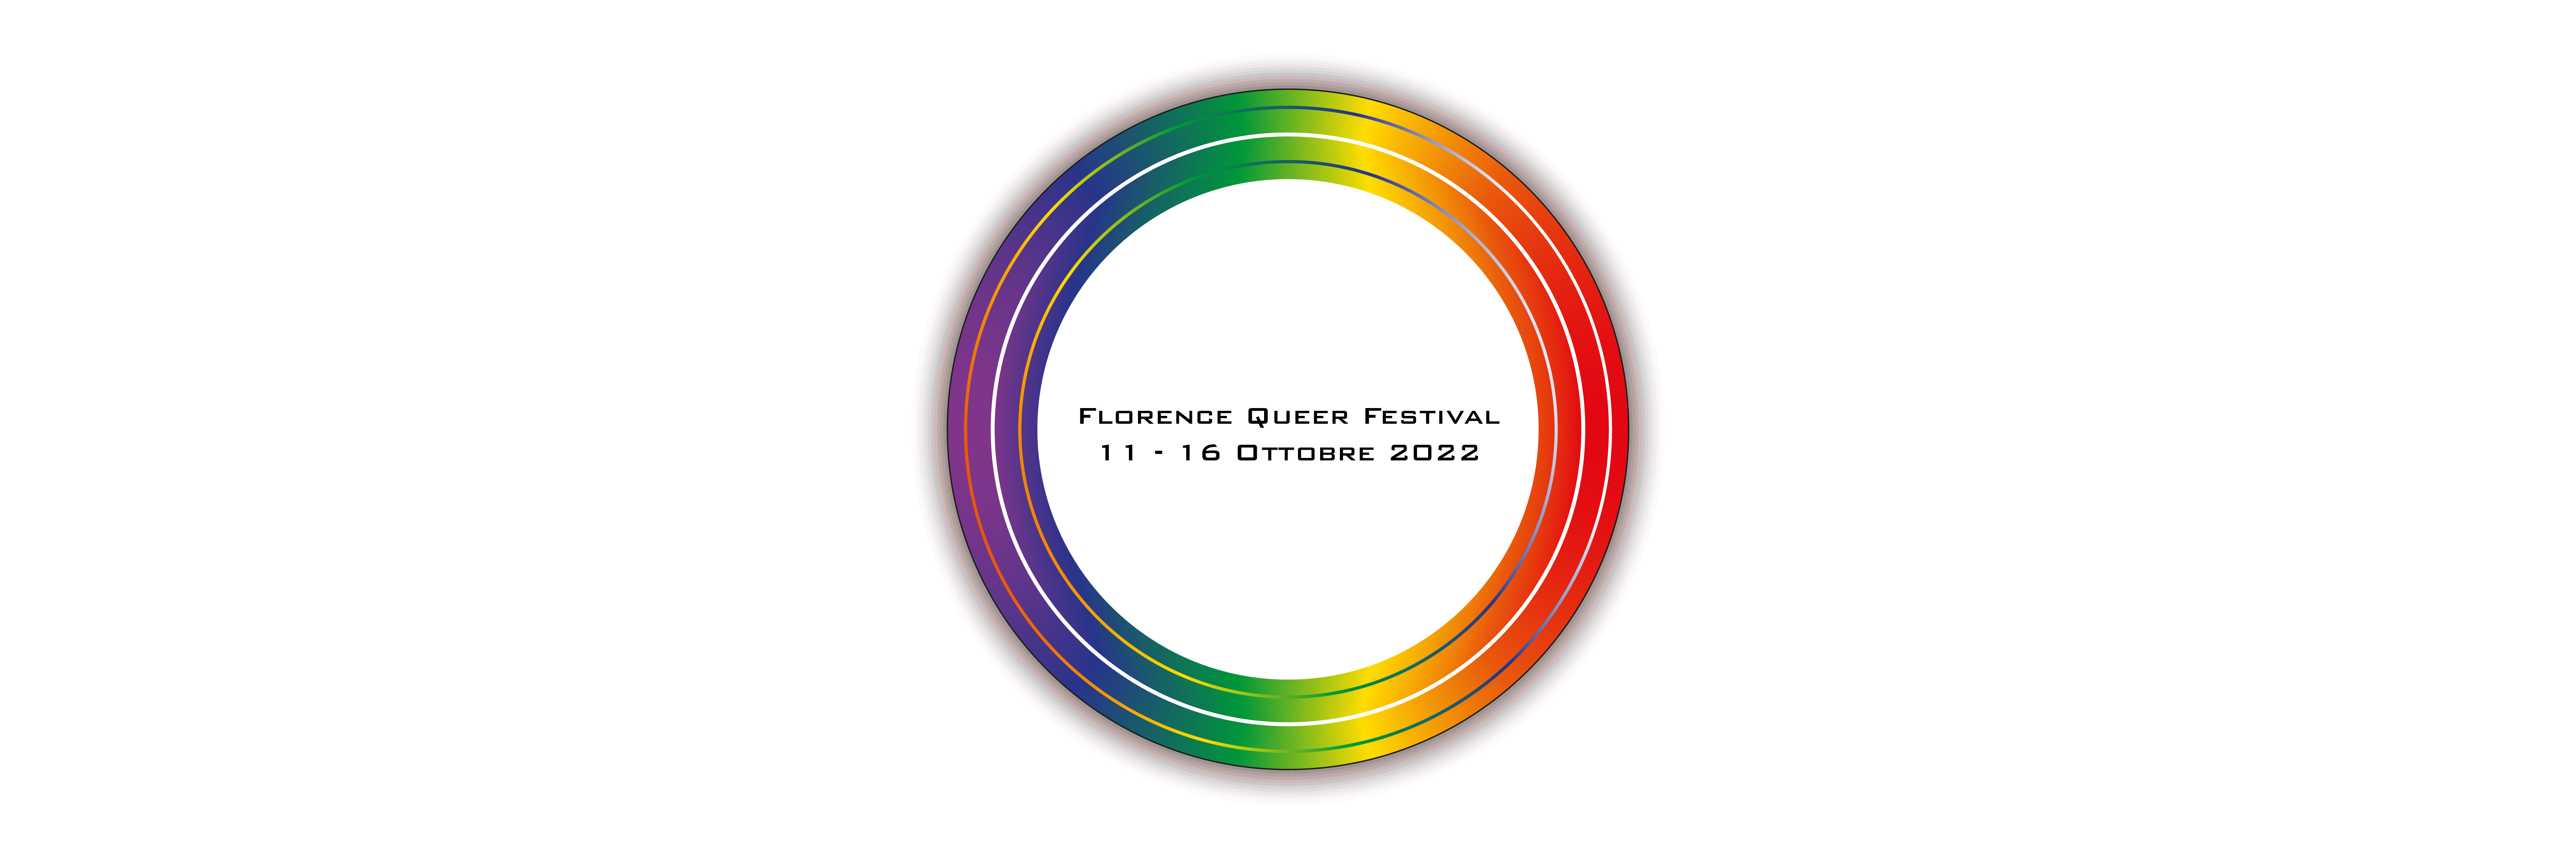 Florence Queer Festival Date 2022